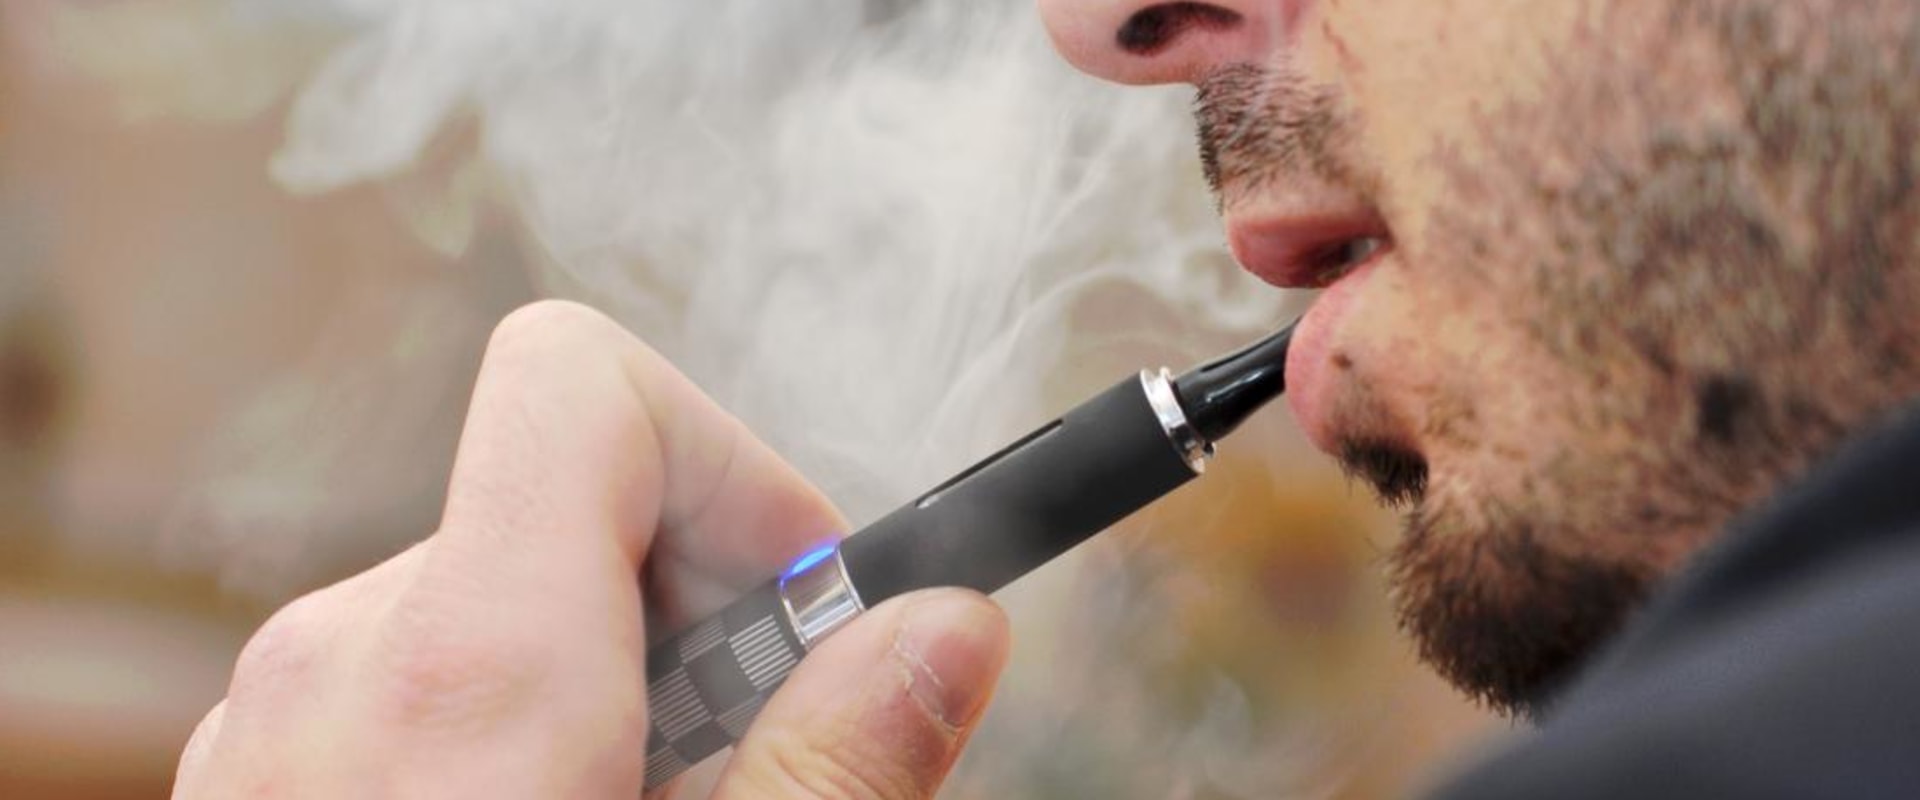 Safety Concerns and Regulations Around Vape Products: What You Need to Know